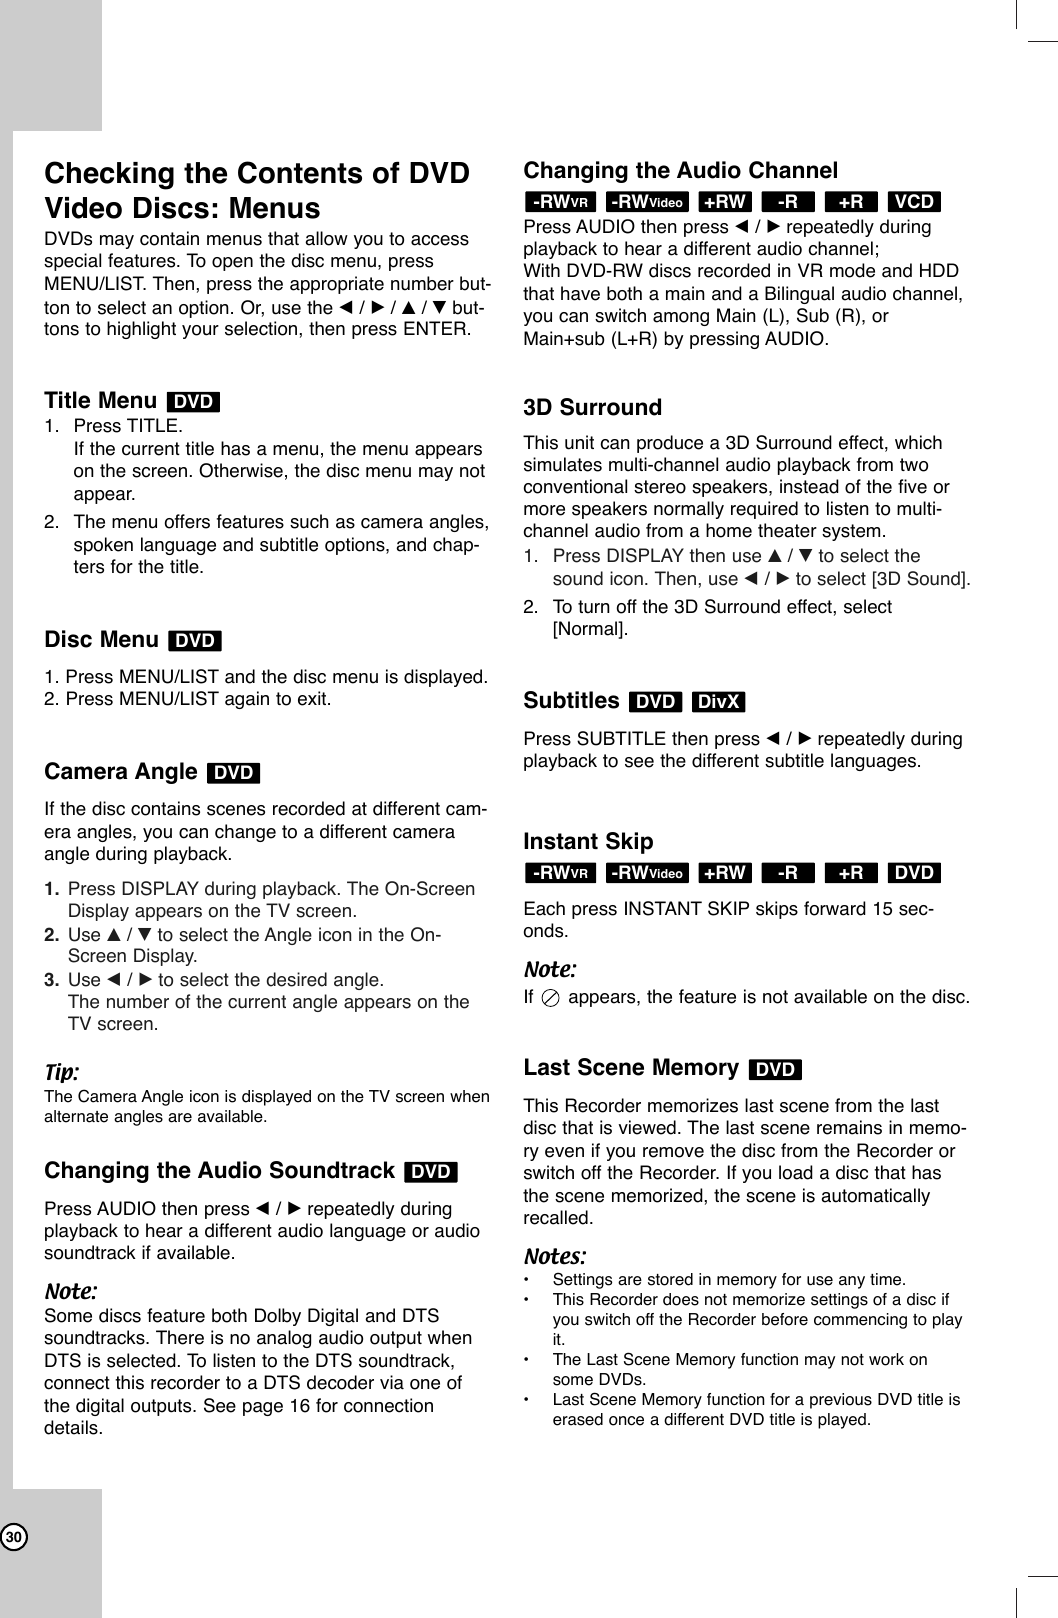 30Checking the Contents of DVDVideo Discs: MenusDVDs may contain menus that allow you to access special features. To open the disc menu, pressMENU/LIST. Then, press the appropriate number but-ton to select an option. Or, use the b/ B/ v/ Vbut-tons to highlight your selection, then press ENTER.Title Menu 1. Press TITLE.If the current title has a menu, the menu appearson the screen. Otherwise, the disc menu may notappear.2. The menu offers features such as camera angles,spoken language and subtitle options, and chap-ters for the title.Disc Menu 1. Press MENU/LIST and the disc menu is displayed.2. Press MENU/LIST again to exit.Camera Angle If the disc contains scenes recorded at different cam-era angles, you can change to a different cameraangle during playback.1. Press DISPLAY during playback. The On-ScreenDisplay appears on the TV screen.2. Use v/ Vto select the Angle icon in the On-Screen Display.3. Use b/ Bto select the desired angle.The number of the current angle appears on theTV screen.Tip:The Camera Angle icon is displayed on the TV screen whenalternate angles are available.Changing the Audio Soundtrack Press AUDIO then press b/ Brepeatedly duringplayback to hear a different audio language or audiosoundtrack if available.Note:Some discs feature both Dolby Digital and DTSsoundtracks. There is no analog audio output whenDTS is selected. To listen to the DTS soundtrack,connect this recorder to a DTS decoder via one ofthe digital outputs. See page 16 for connectiondetails.Changing the Audio ChannelPress AUDIO then press b/ Brepeatedly duringplayback to hear a different audio channel;With DVD-RW discs recorded in VR mode and HDDthat have both a main and a Bilingual audio channel,you can switch among Main (L), Sub (R), orMain+sub (L+R) by pressing AUDIO.3D SurroundThis unit can produce a 3D Surround effect, which simulates multi-channel audio playback from two conventional stereo speakers, instead of the five ormore speakers normally required to listen to multi-channel audio from a home theater system. 1. Press DISPLAY then use v/ Vto select thesound icon. Then, use b/ Bto select [3D Sound].2. To turn off the 3D Surround effect, select[Normal].Subtitles Press SUBTITLE then press b/ Brepeatedly duringplayback to see the different subtitle languages.Instant SkipEach press INSTANT SKIP skips forward 15 sec-onds.Note:If  appears, the feature is not available on the disc.Last Scene Memory This Recorder memorizes last scene from the lastdisc that is viewed. The last scene remains in memo-ry even if you remove the disc from the Recorder orswitch off the Recorder. If you load a disc that hasthe scene memorized, the scene is automaticallyrecalled.Notes:•Settings are stored in memory for use any time.•This Recorder does not memorize settings of a disc ifyou switch off the Recorder before commencing to playit.•The Last Scene Memory function may not work onsome DVDs.•Last Scene Memory function for a previous DVD title iserased once a different DVD title is played.DVDDVD+R-R+RW-RWVideo-RWVRDivXDVDVCD+R-R+RW-RWVideo-RWVRDVDDVDDVDDVD